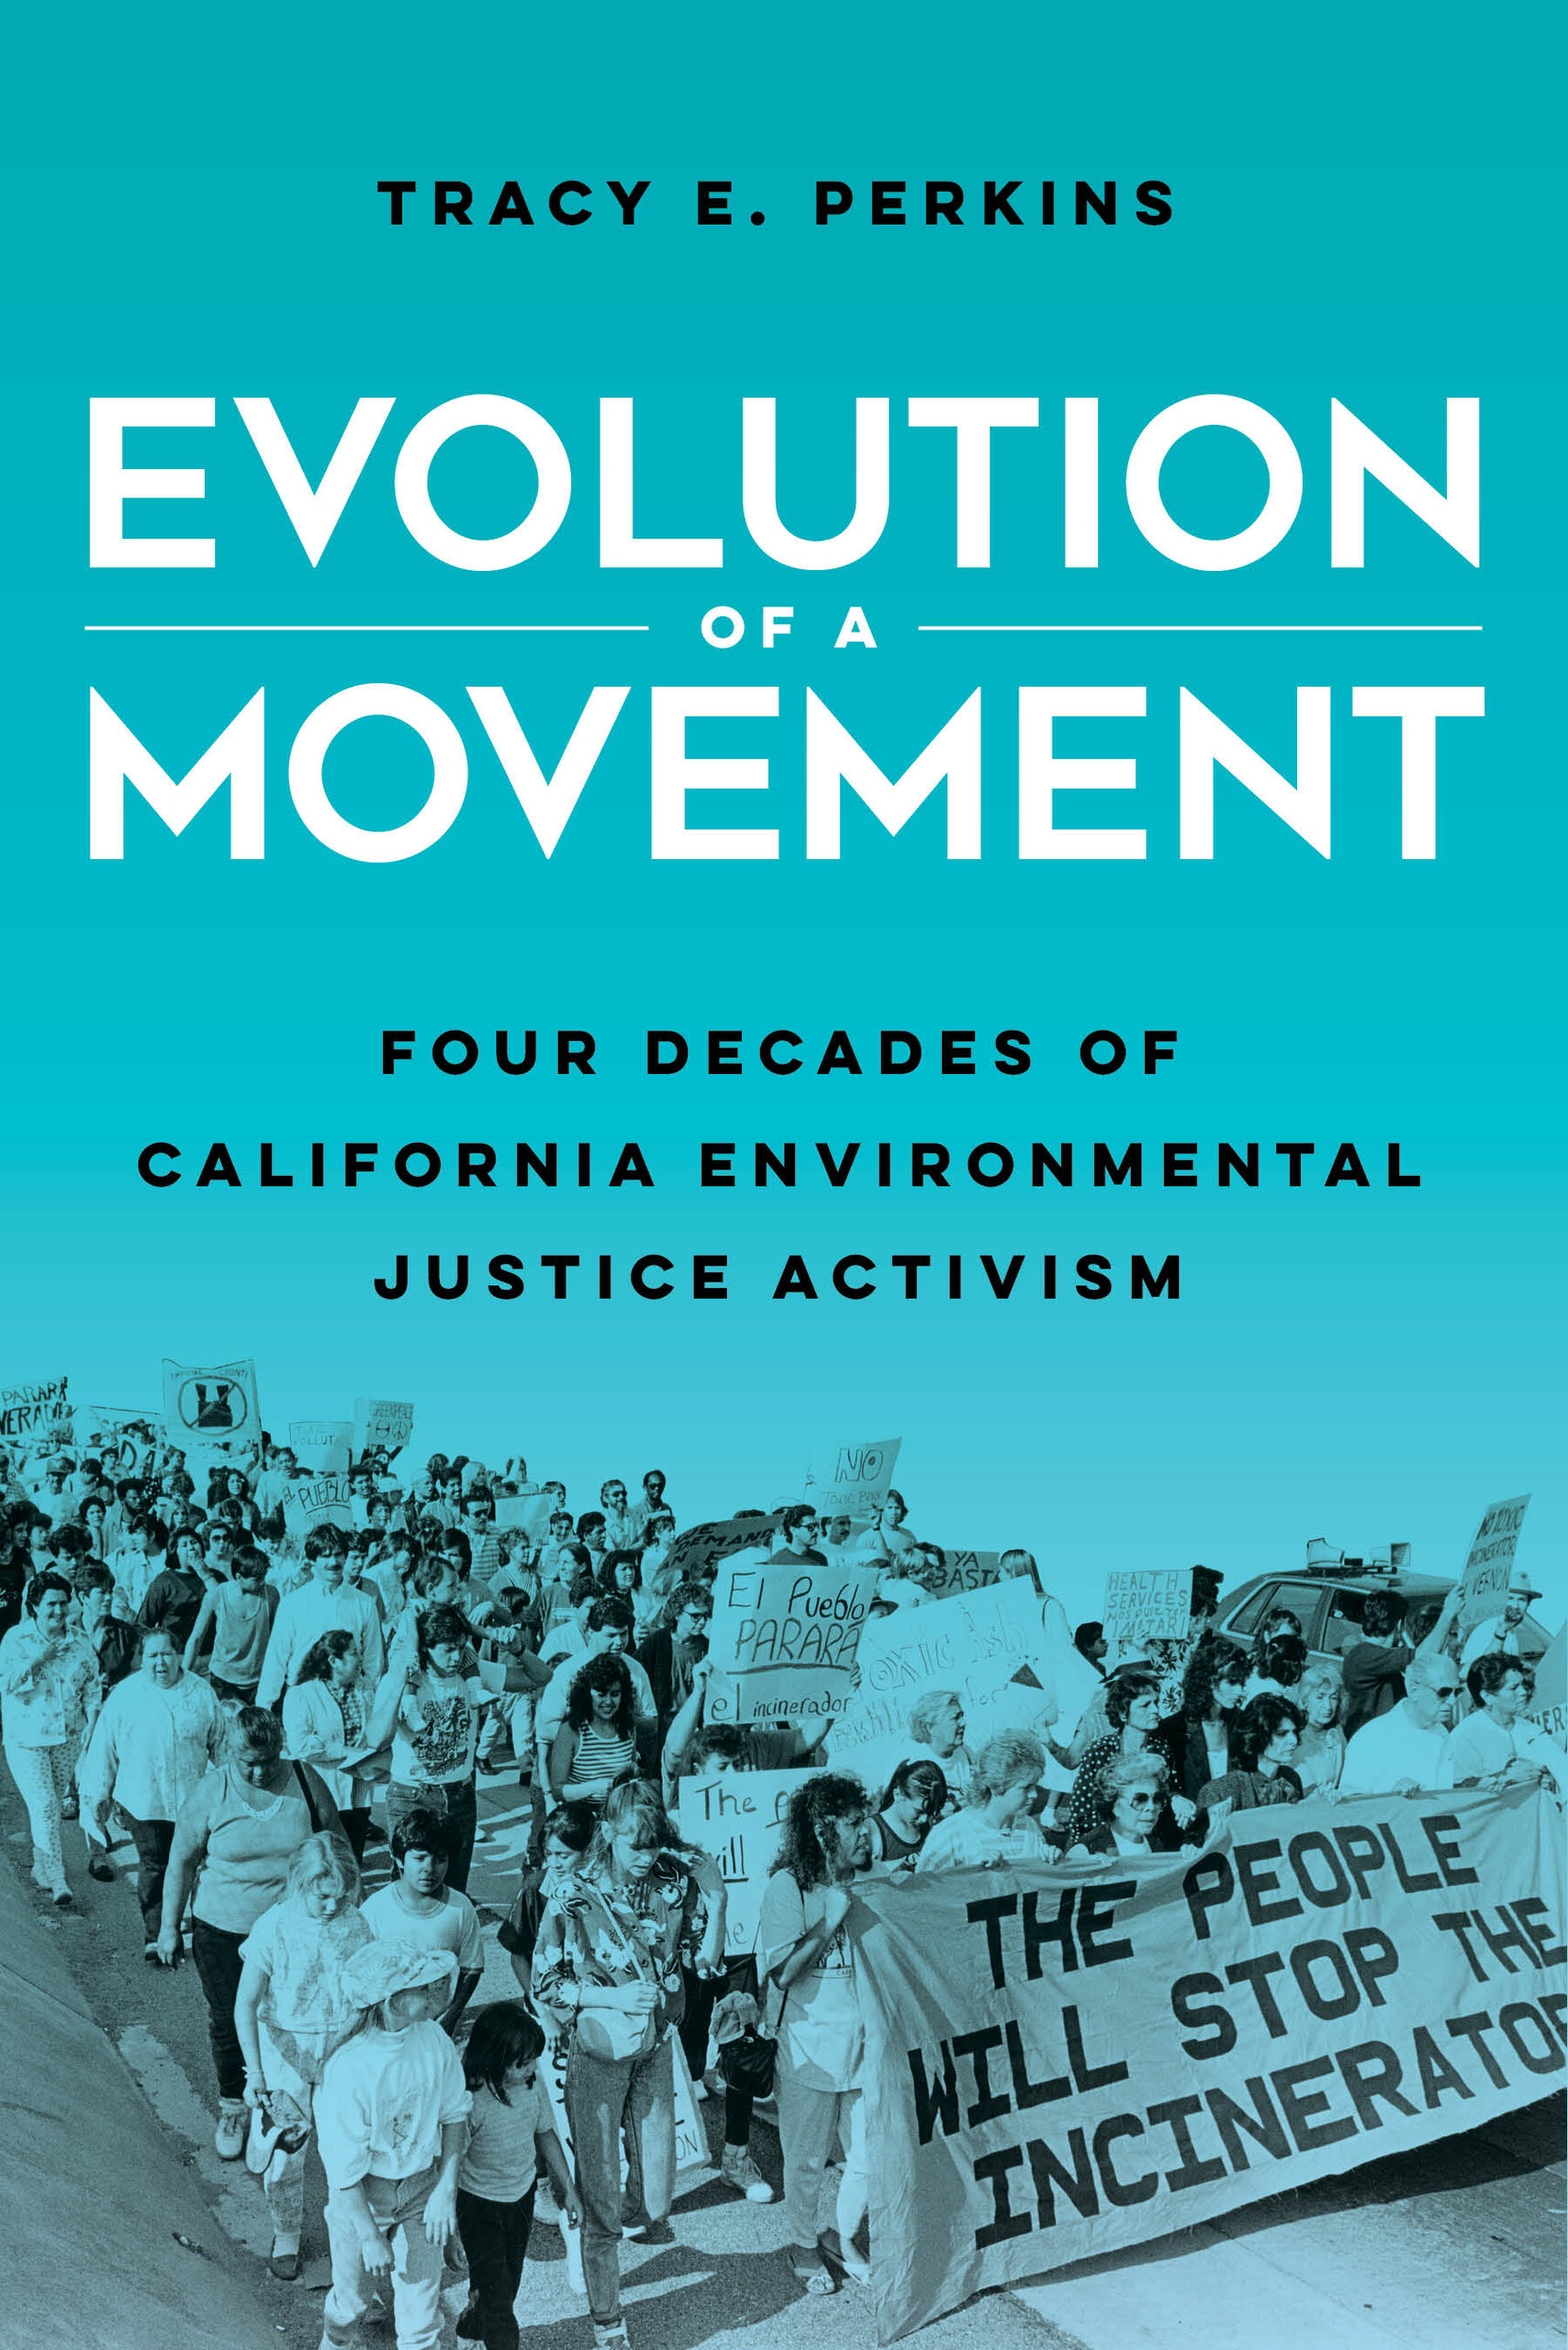 Evolution of a Movement Book cover with protesters marching